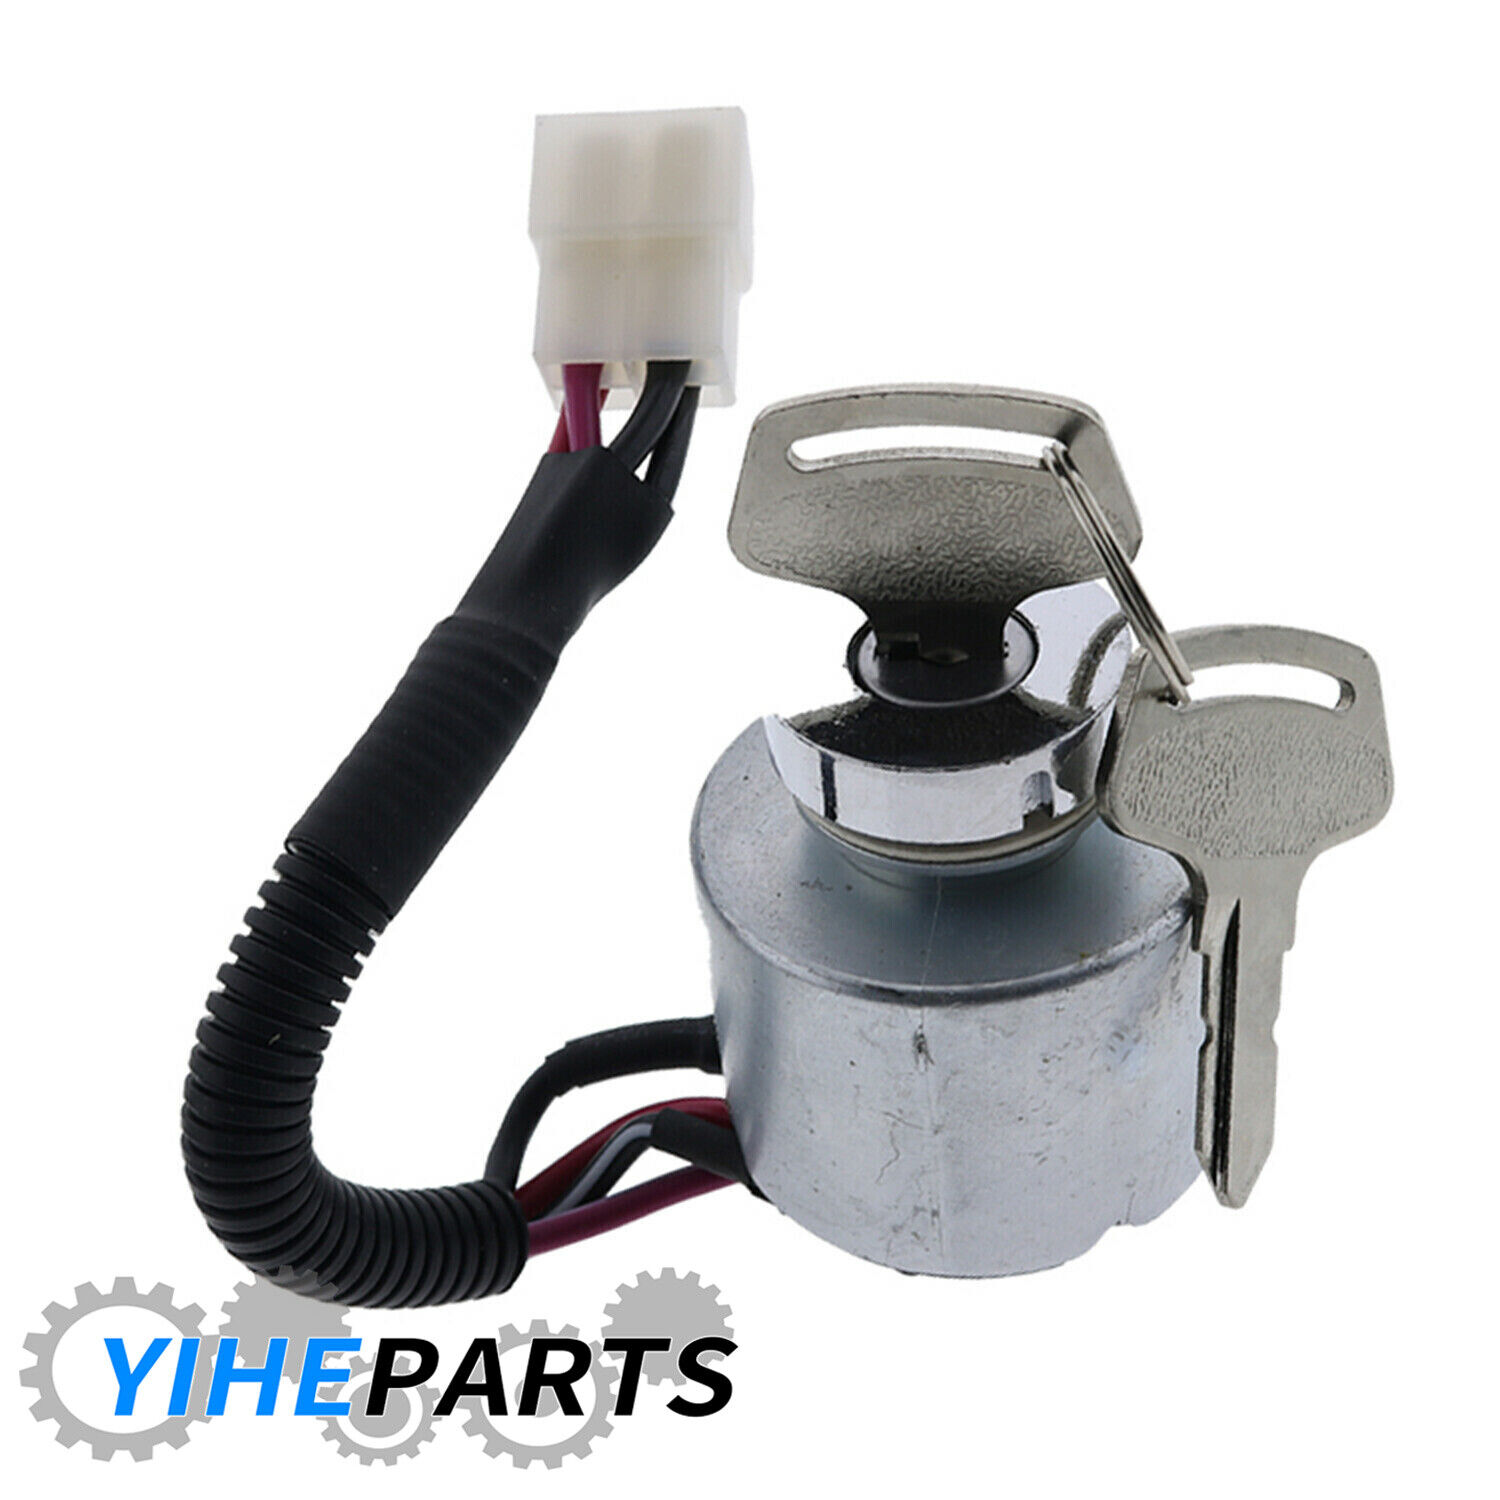 Hachiparts Ignition Switch With 2 Keys 66101-55200 66101-55202 66101-55203 For Kubot a Garden Tractor BX22D BX23D BX1500D BX1800D BX1830D BX2200D BX2230D G1700 G18 G1800 G18HD G1900 G2000 G2160 G21HD 